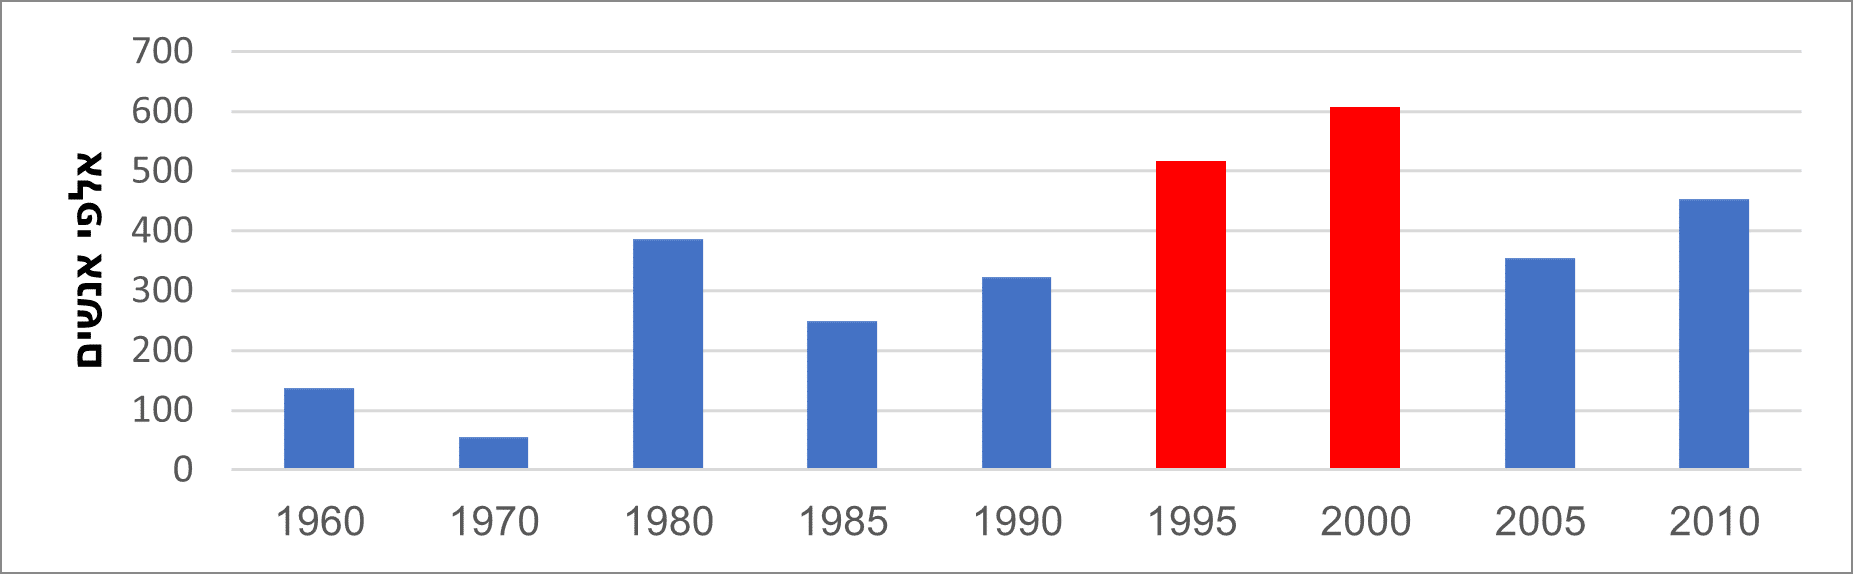 Graph 1: The population increase in Judea, Samaria, and the Gaza Strip, by half-decades. A significant uptick is visible at the years 1995 and 2000, over and above the population’s pace of natural increase. Source: The UN, World Population Prospects: The 2012 Revision 